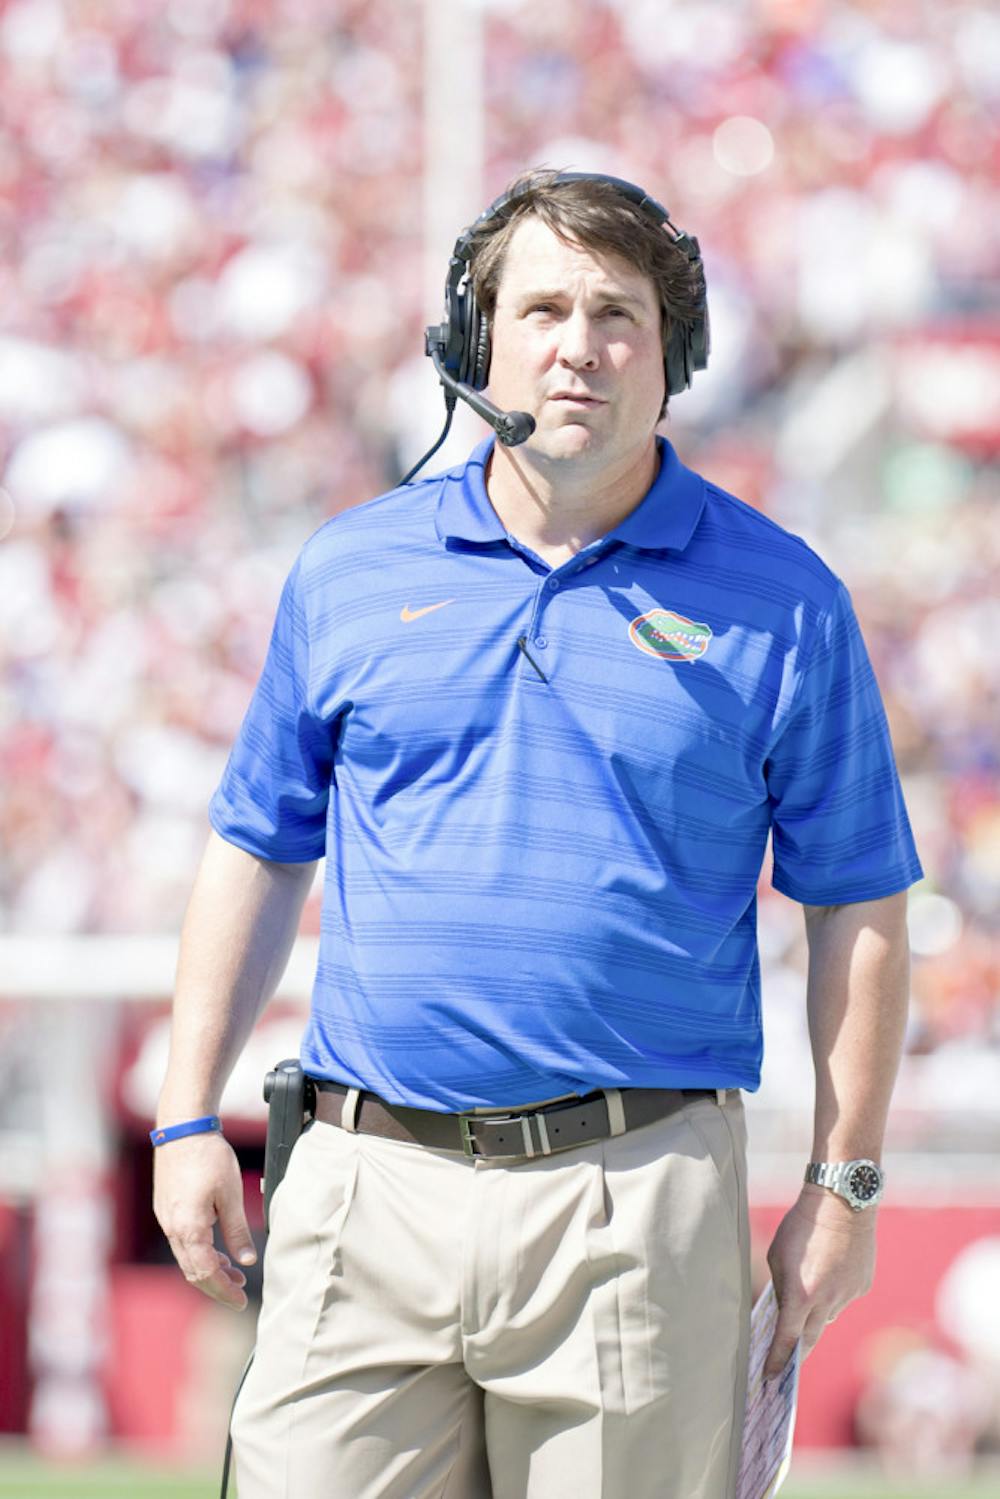 <p>Will Muschamp looks down the field during Florida's 42-21 loss to Alabama on Sept. 20 at Bryant-Denny Stadium.</p>